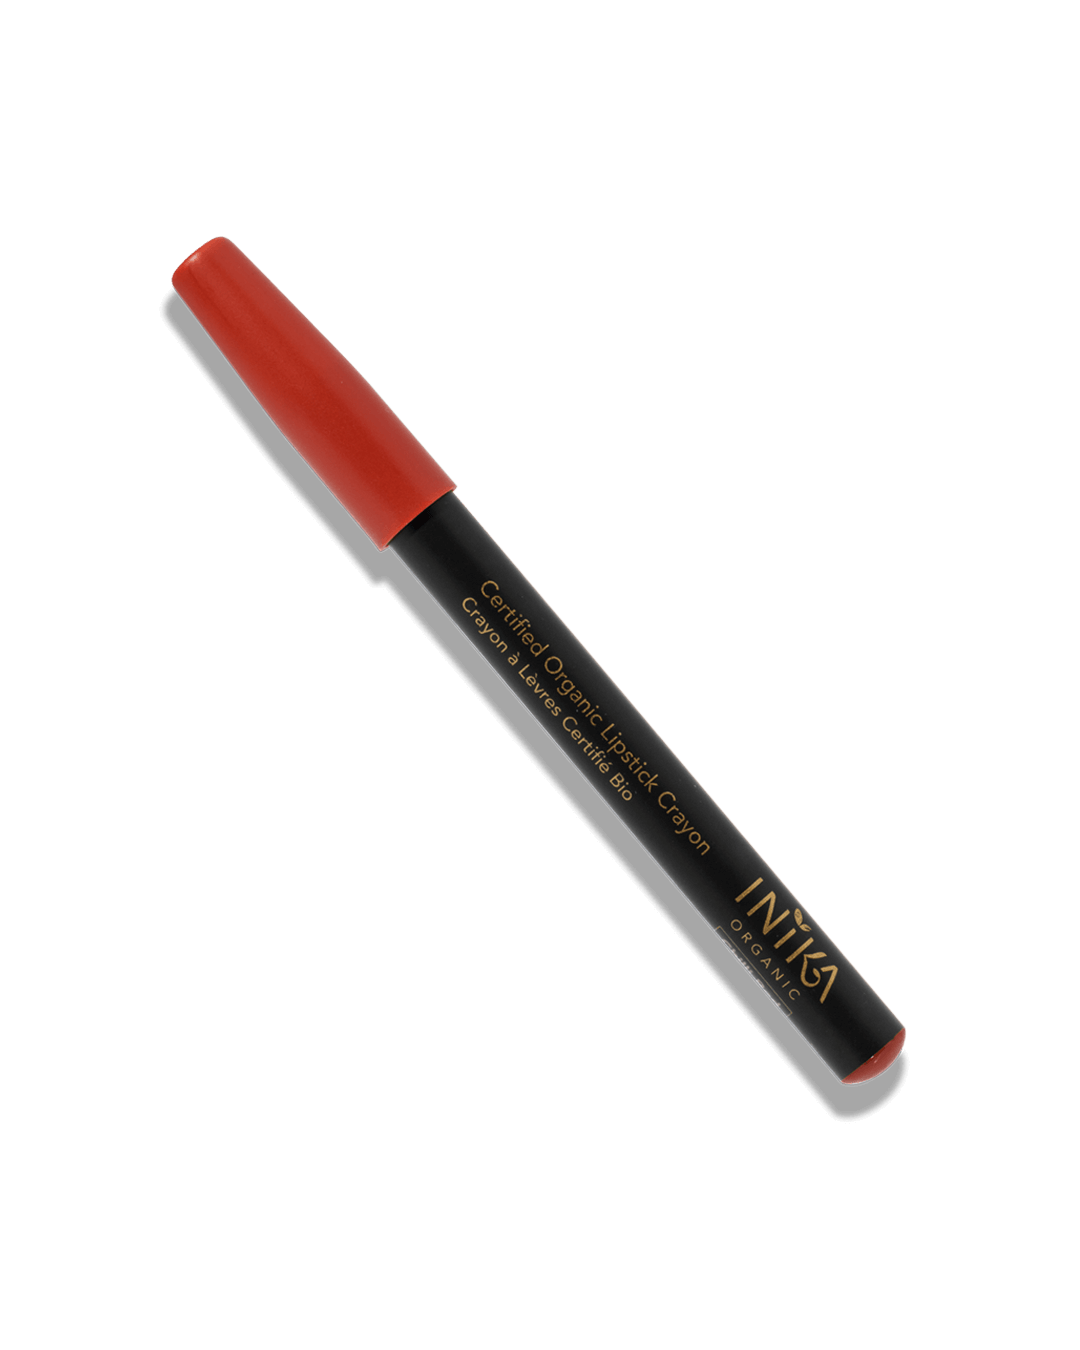 Certified Organic Lipstick Crayon Chilly Red